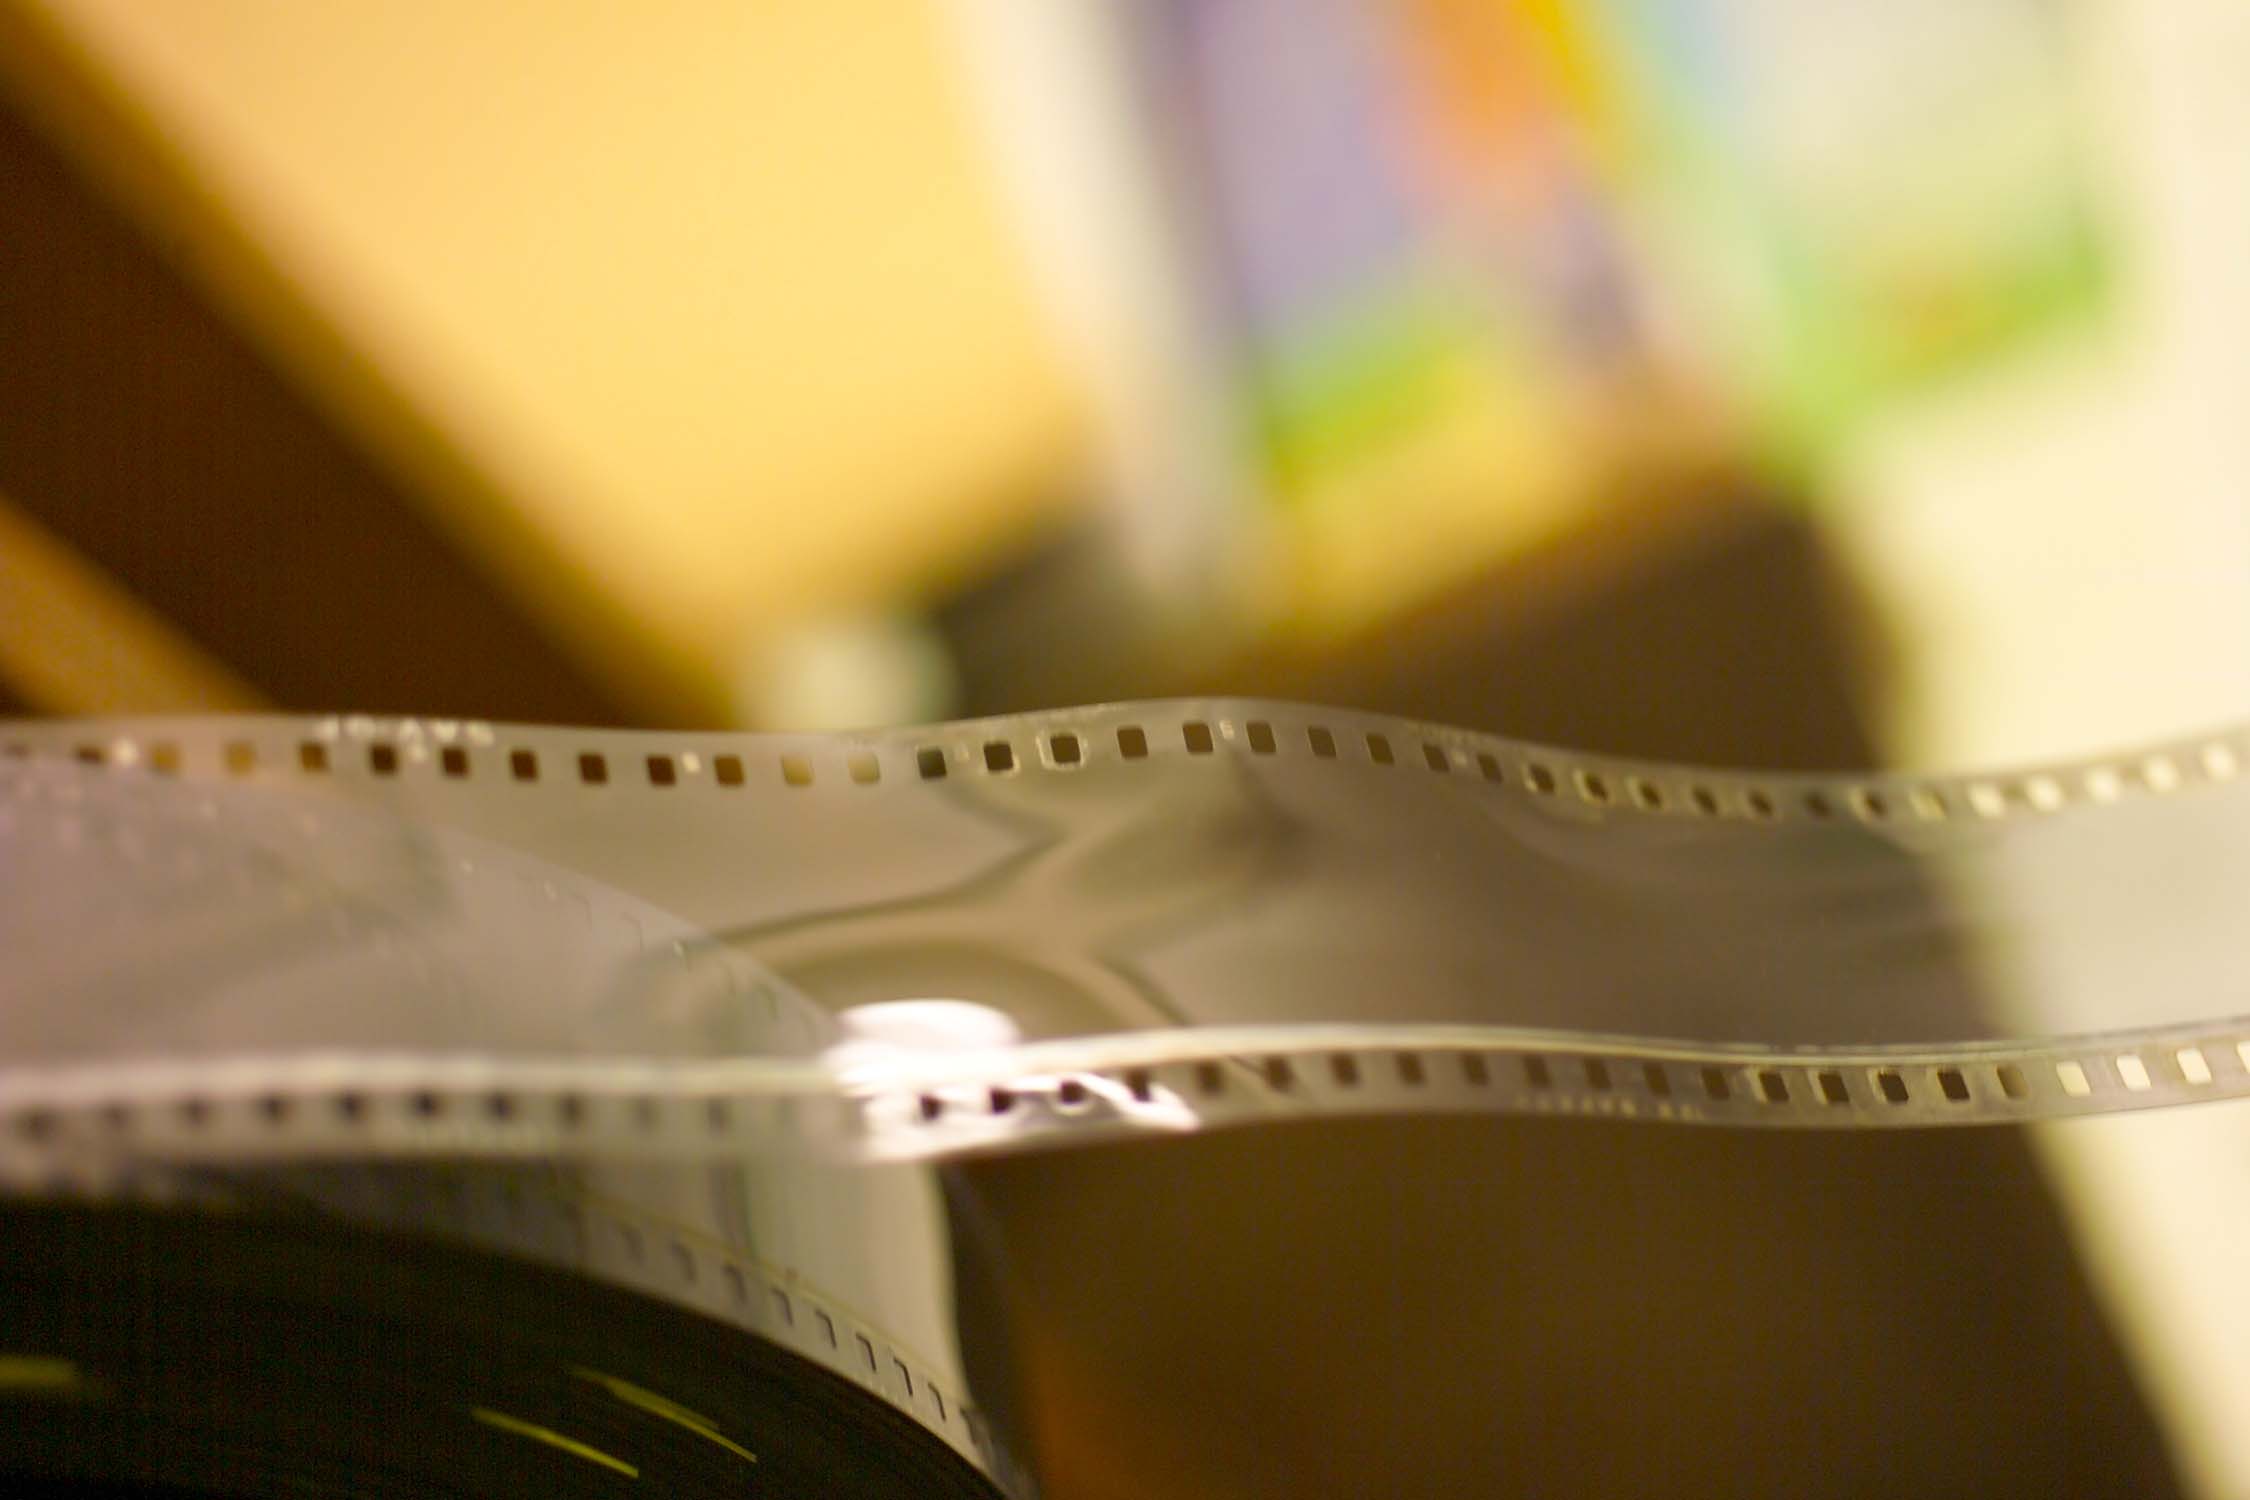 A film strip became warped because of irregular shrinkage, uneven distances between the perforations would cause jittering images